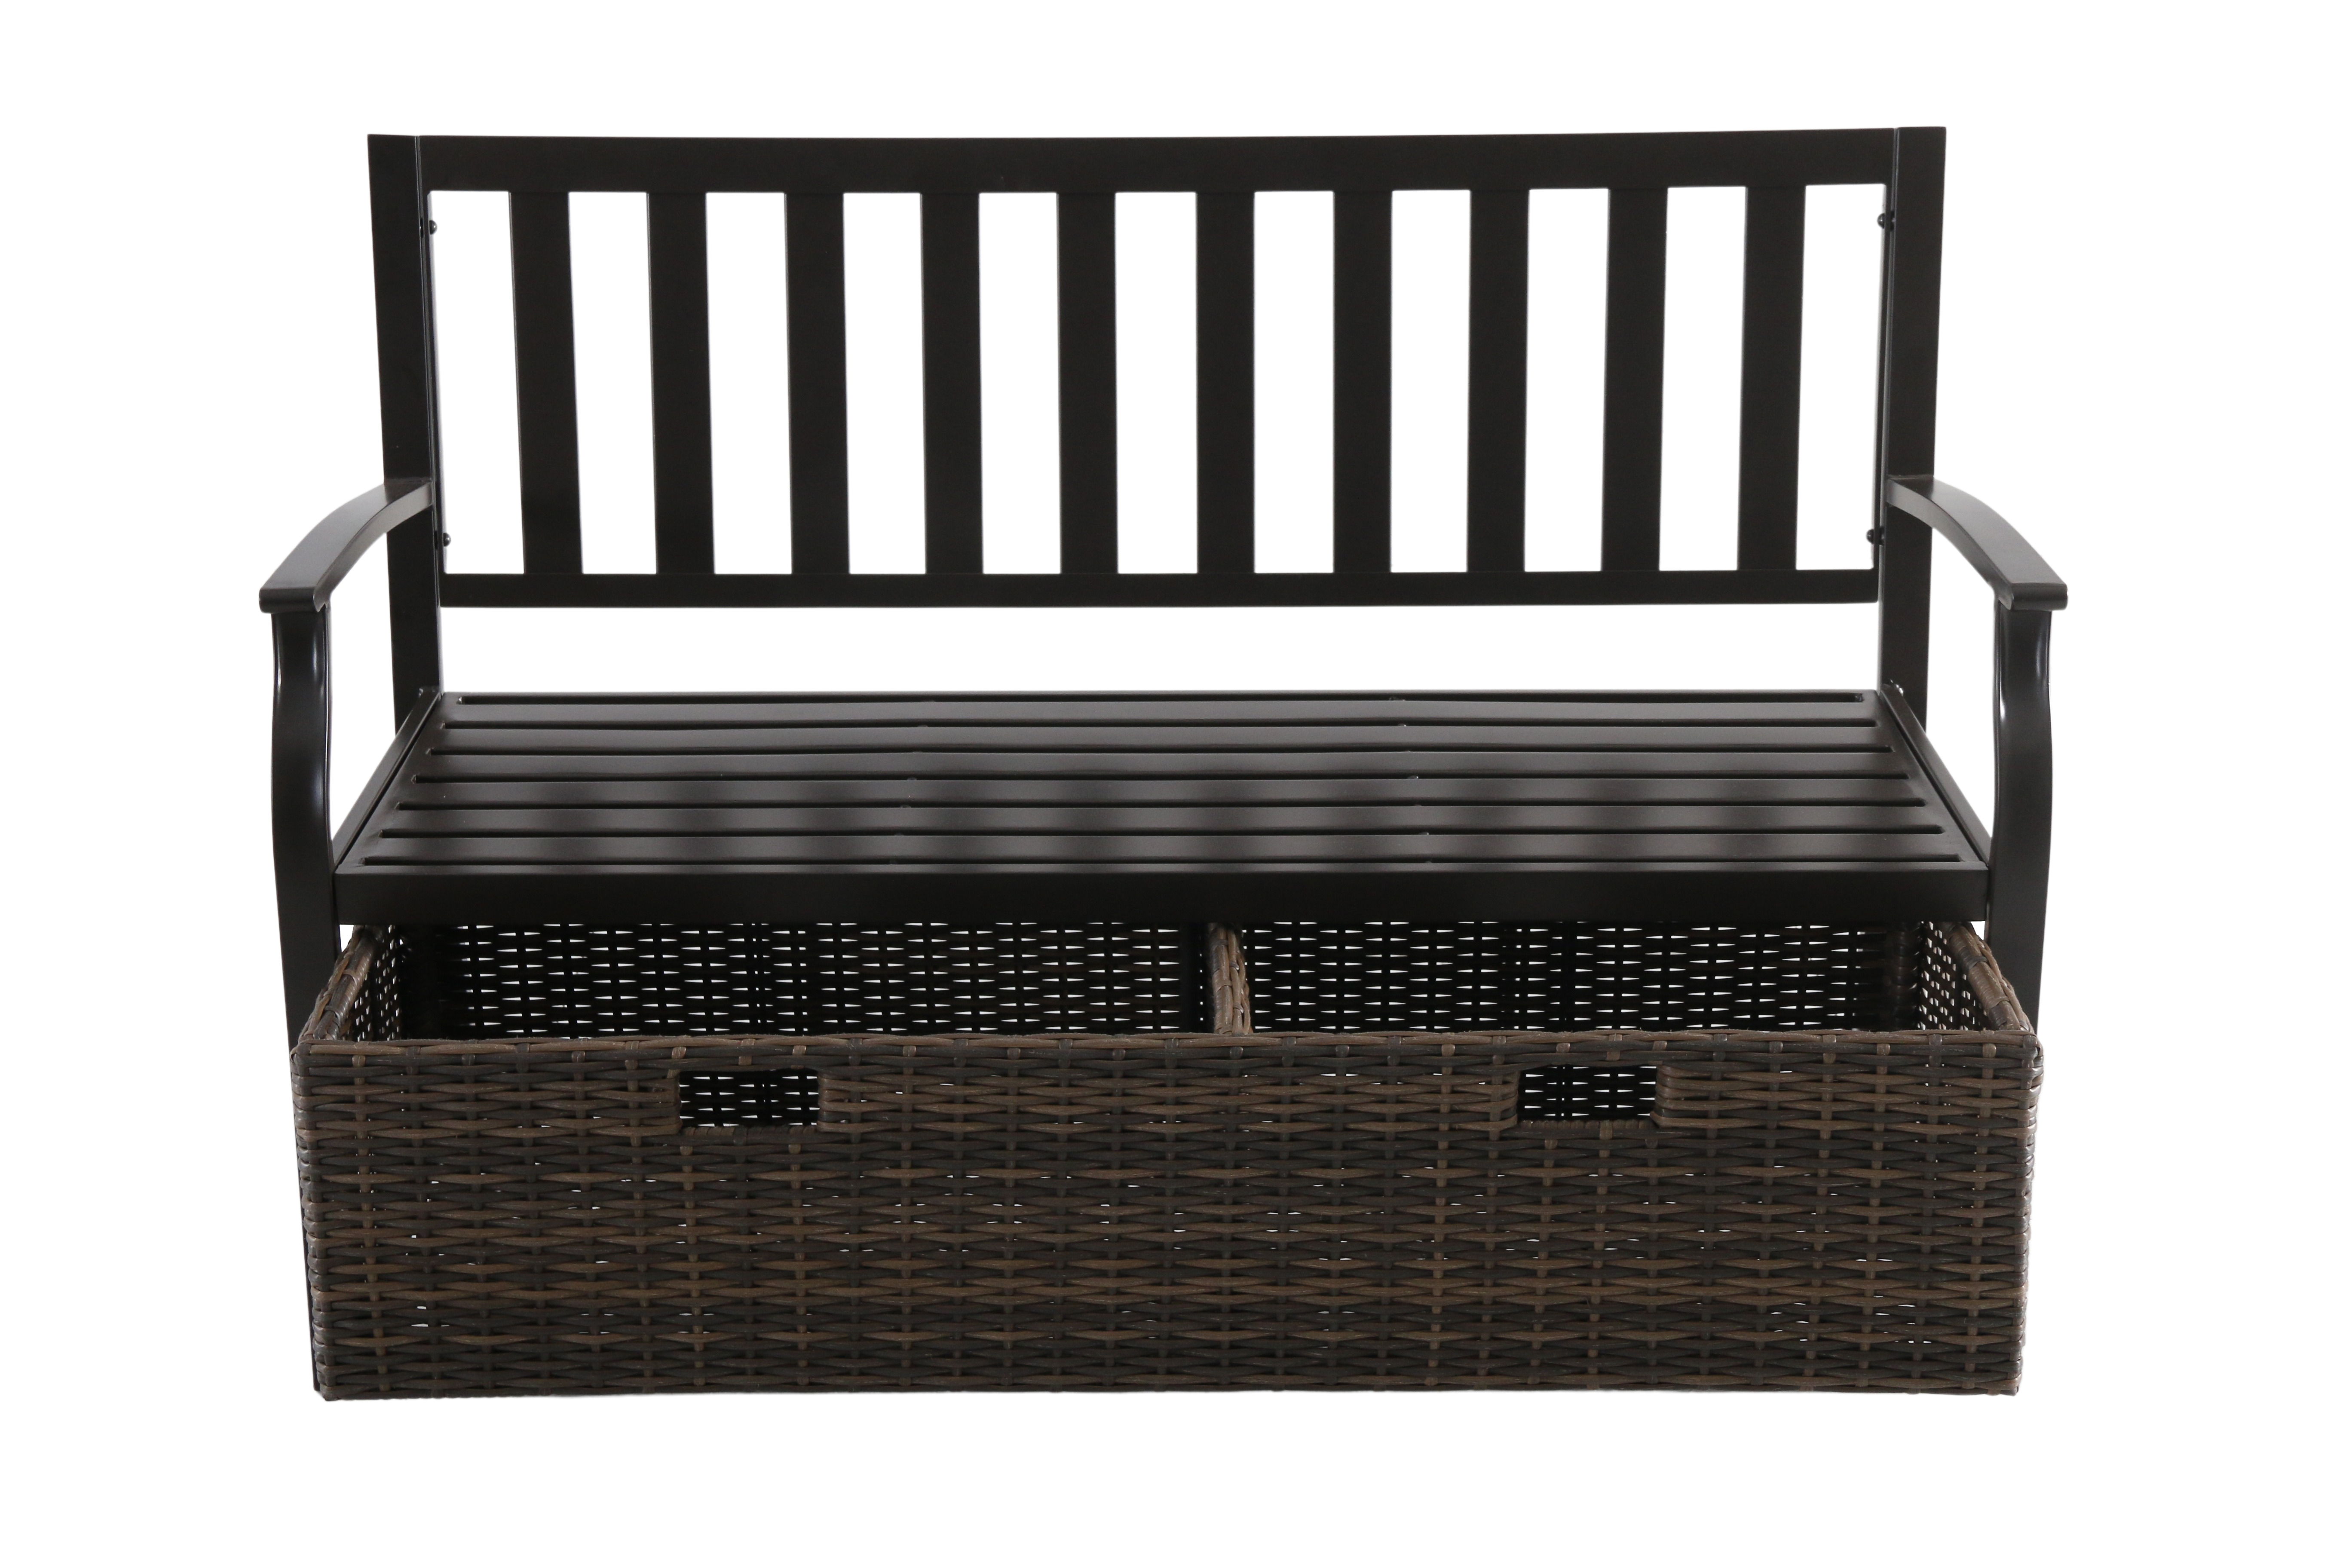 Better Homes & Gardens Camrose Farmhouse Steel Outdoor Bench with Wicker Storage Box, Bronze/Brown - image 3 of 11